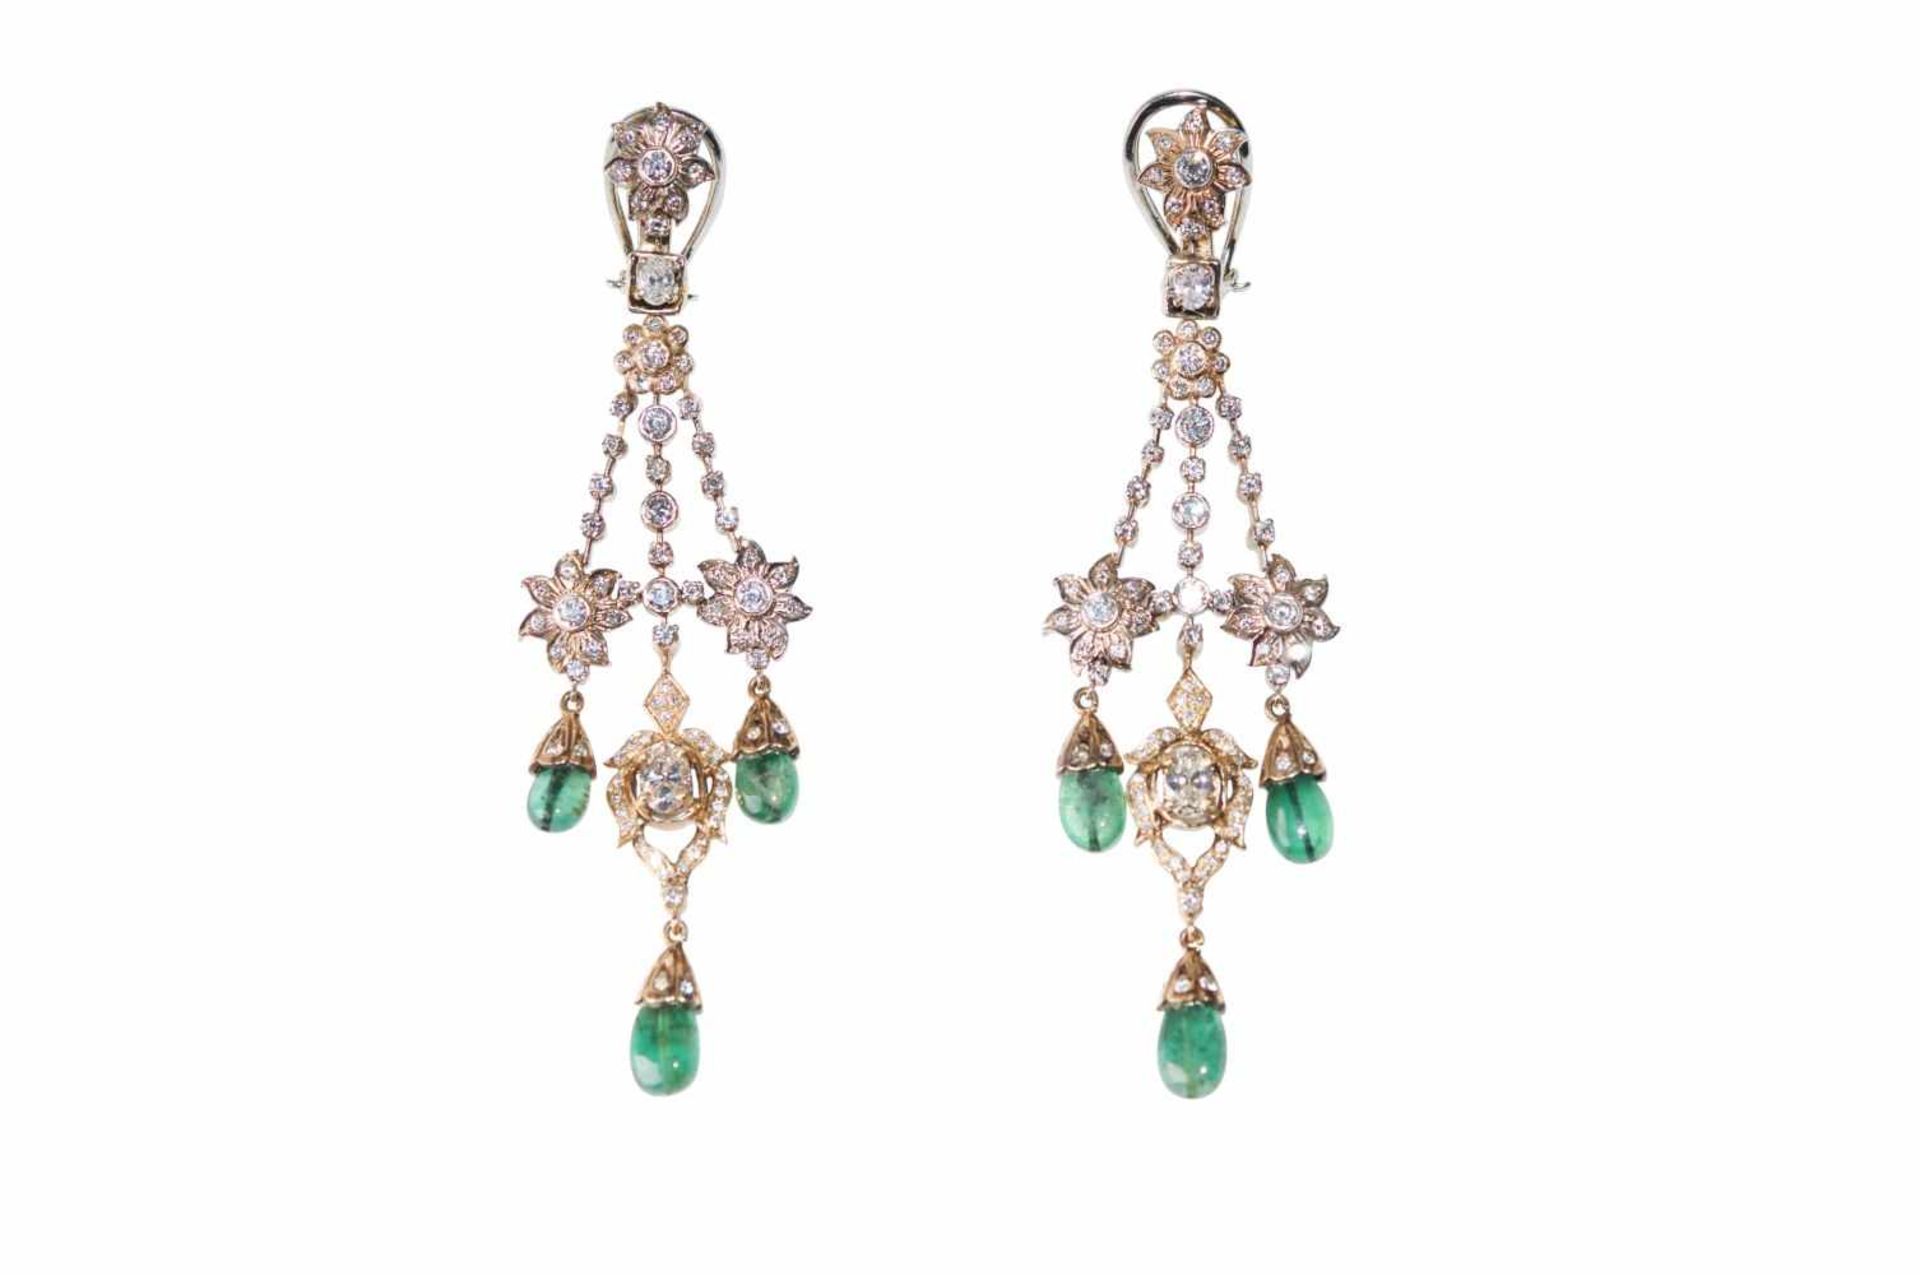 Brilliant emerald ear clips18Kt pink gold ear clips with diamonds total carat weight approx. 3,2ct